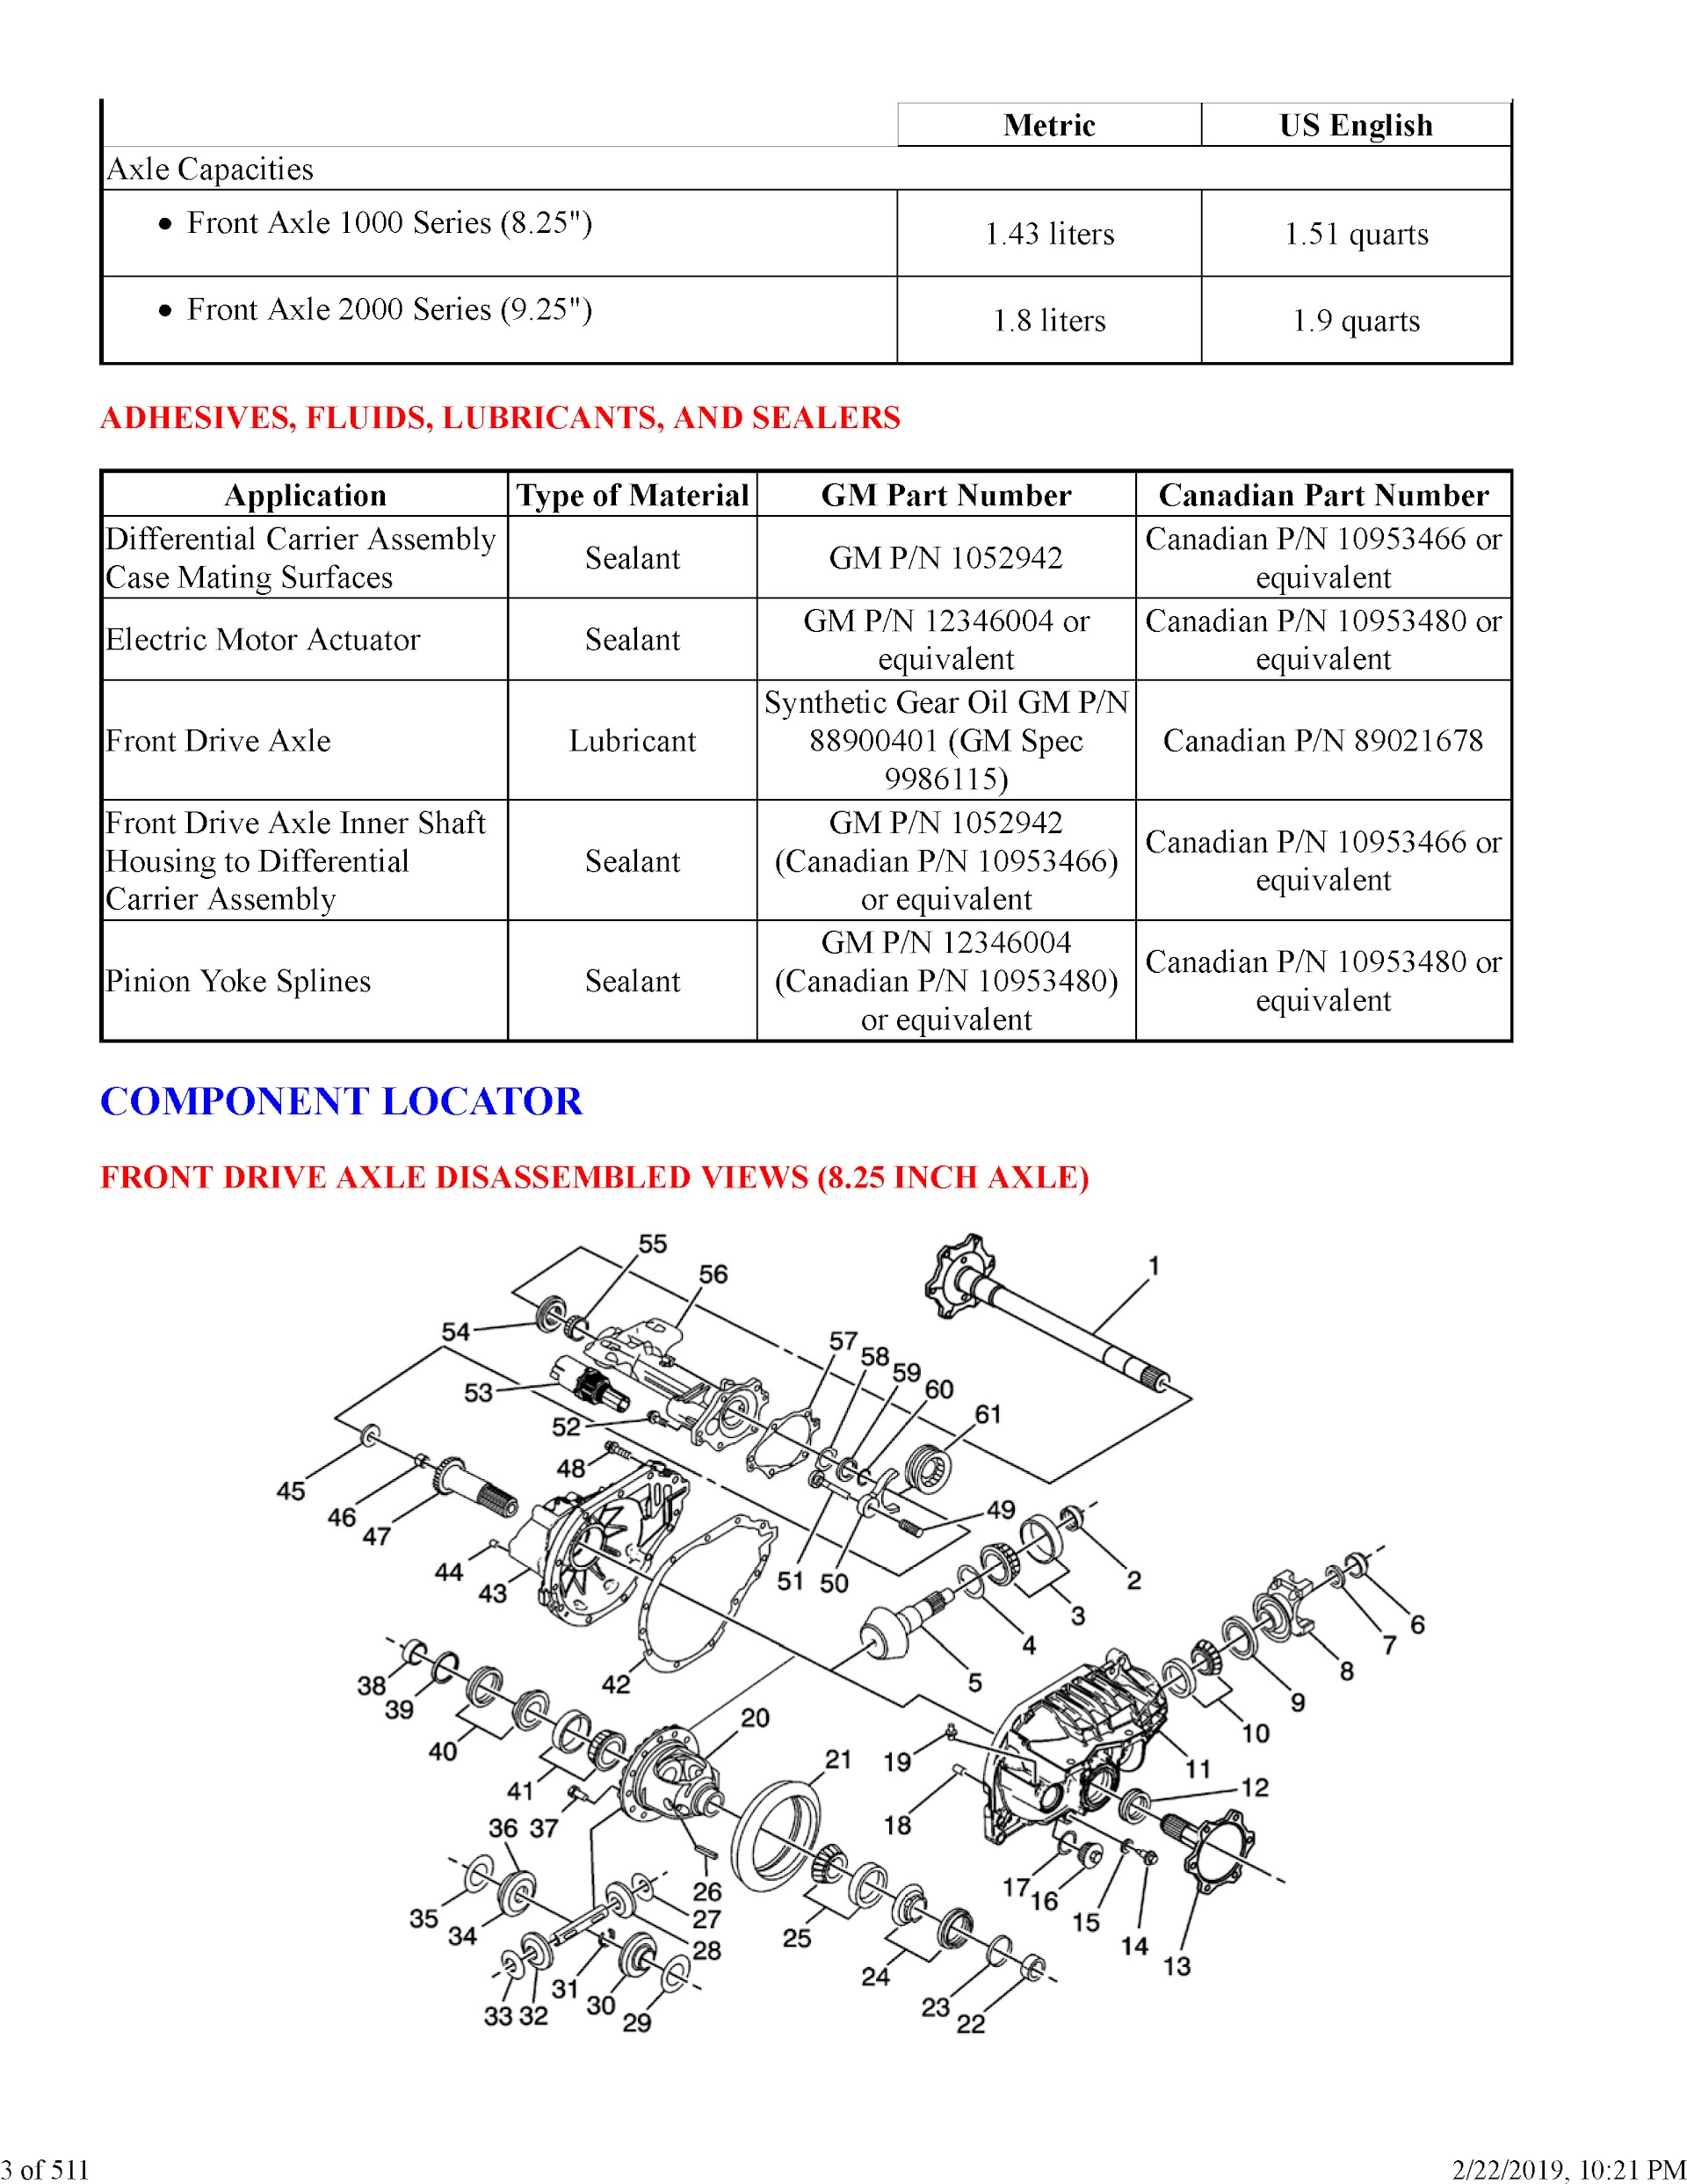 2016-2018 Chevrolet Silverado Repair Manual and GMC Sierra, front drive axle assemble and disassemble